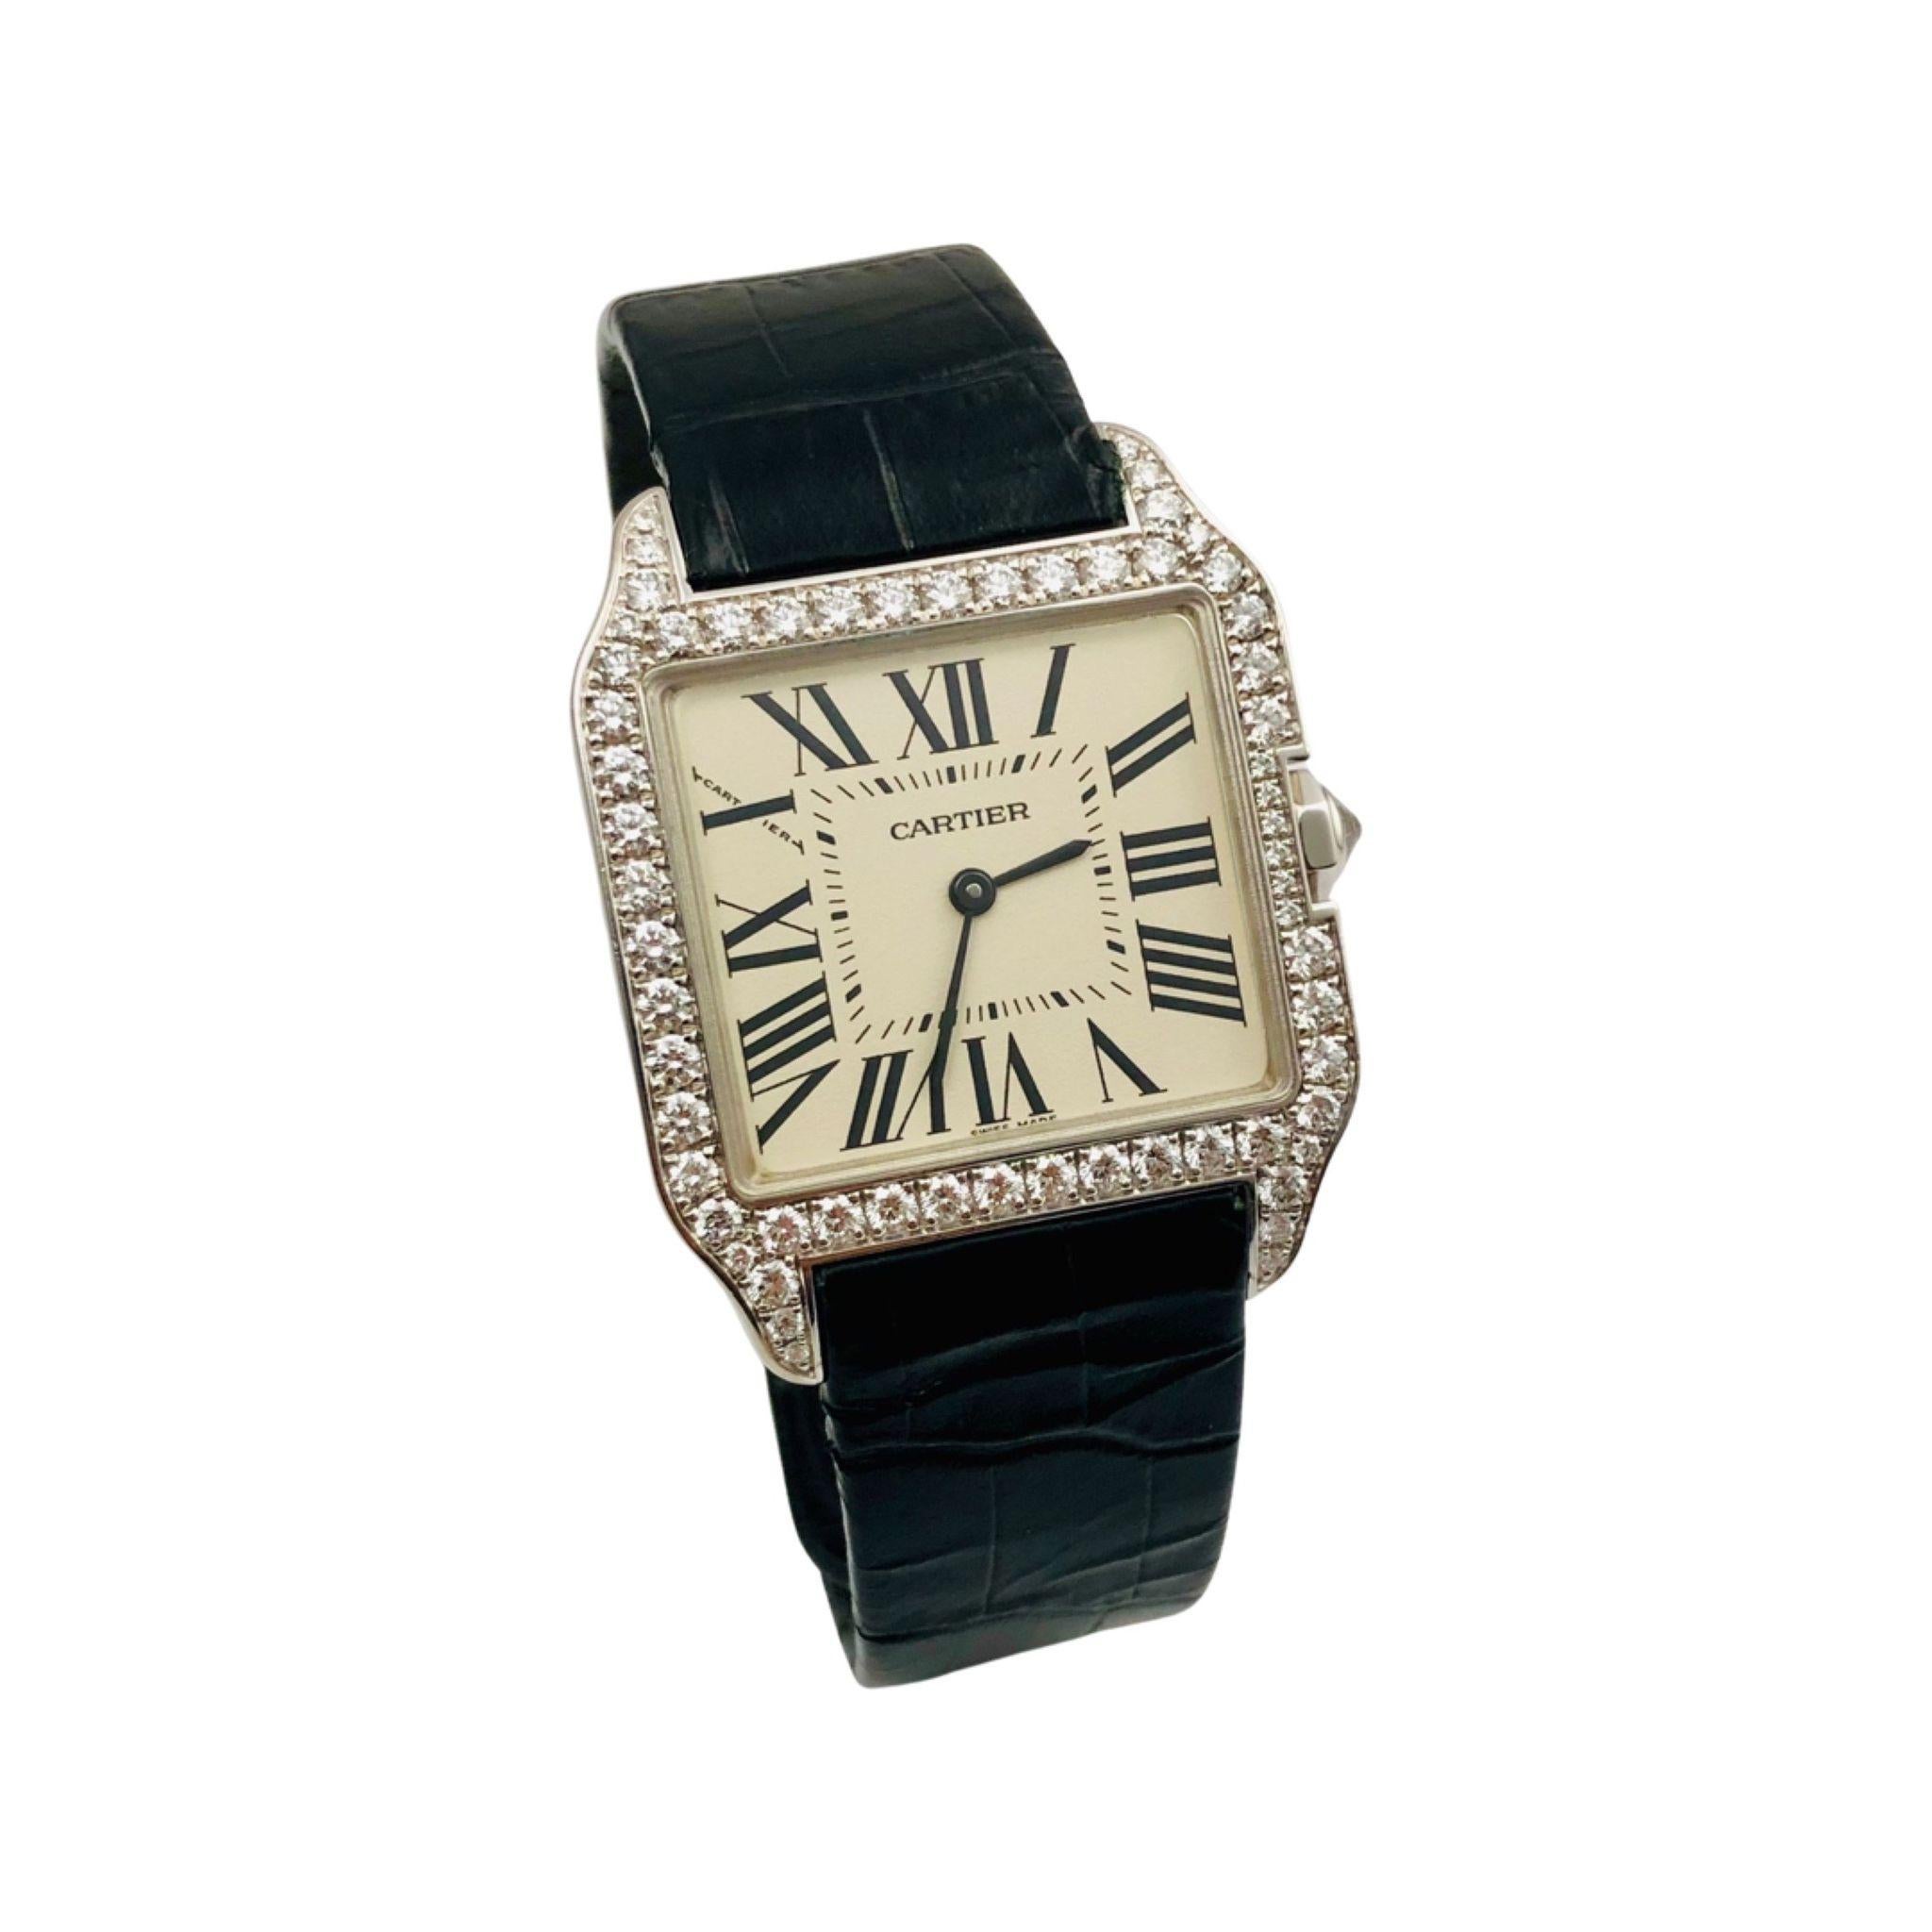 RETAIL PRICE: $48,200

Cartier Santos Dumont watch, quartz movement. 18K rhodiumized white gold case set with 61 brilliant-cut diamonds and 7-sided crown set with a brilliant-cut diamond, totalling 1.70 carats. Cream dial. Black oxidized steel